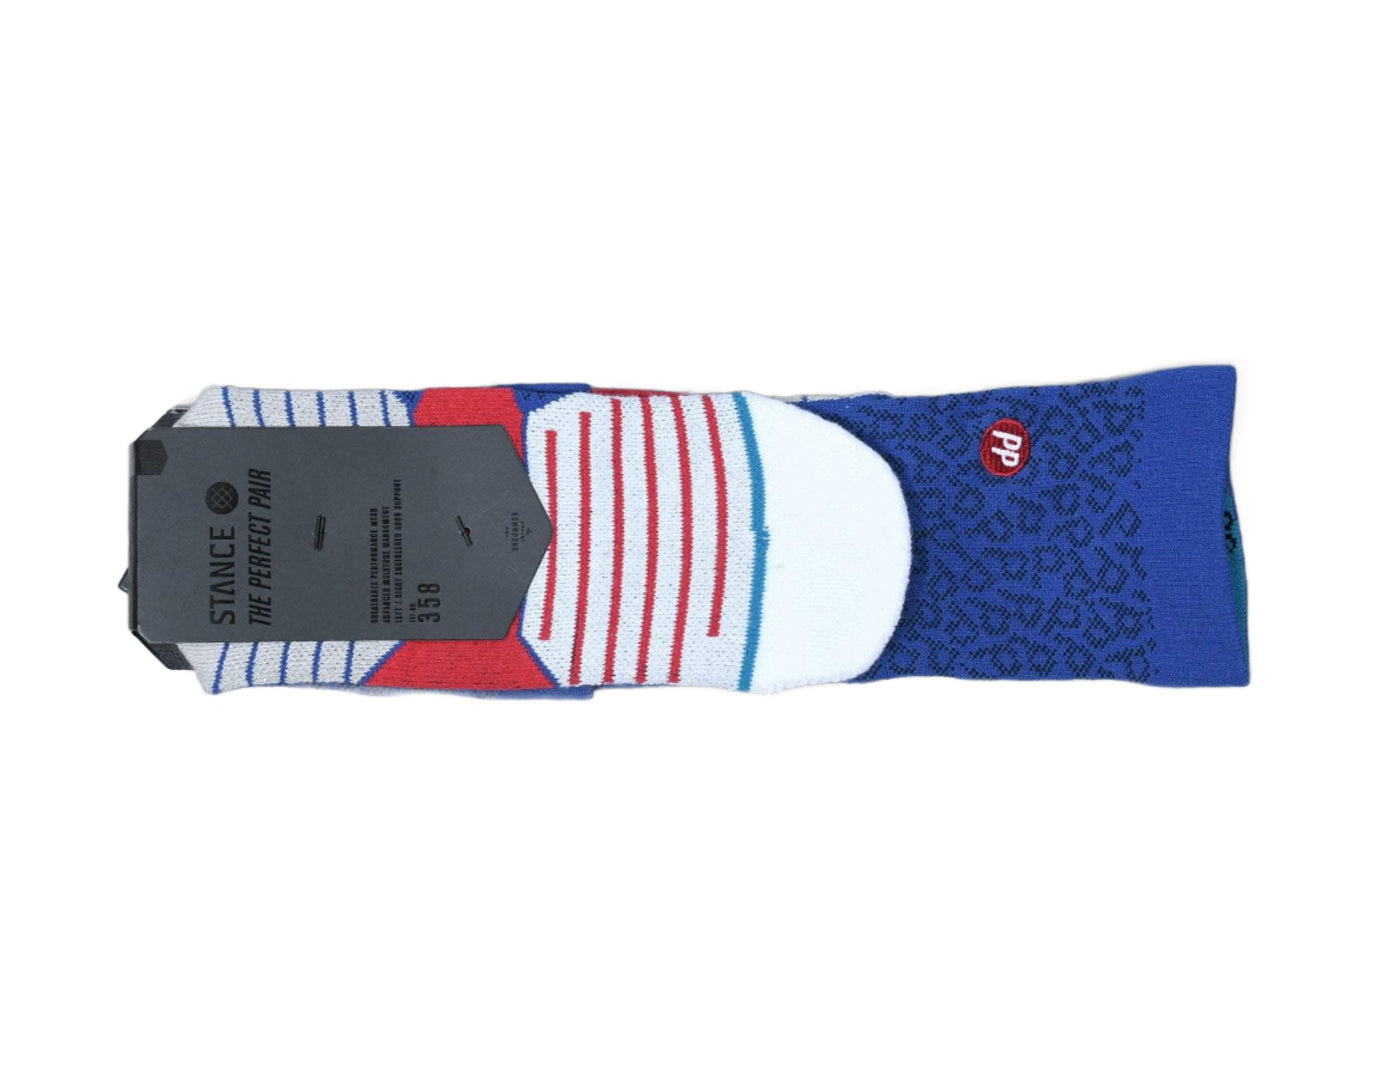 Accessories Socks Stance Perfect Pair V1 Blue Stance Socks / Blue / One Size